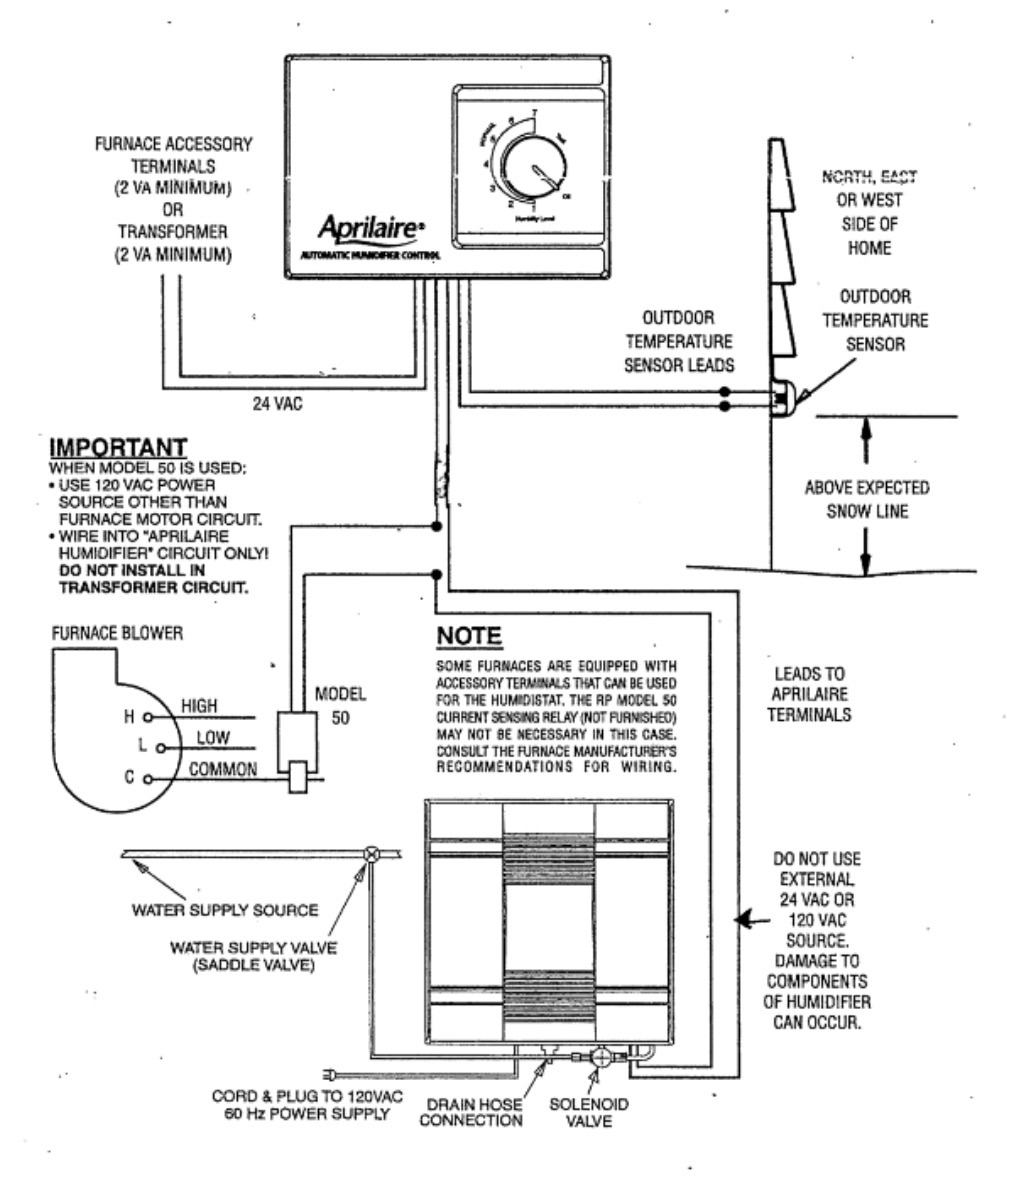 Heating - Wiring Aprilaire 700 Humidifier To York Tg9* Furnace - Aprilaire 700 Wiring Diagram